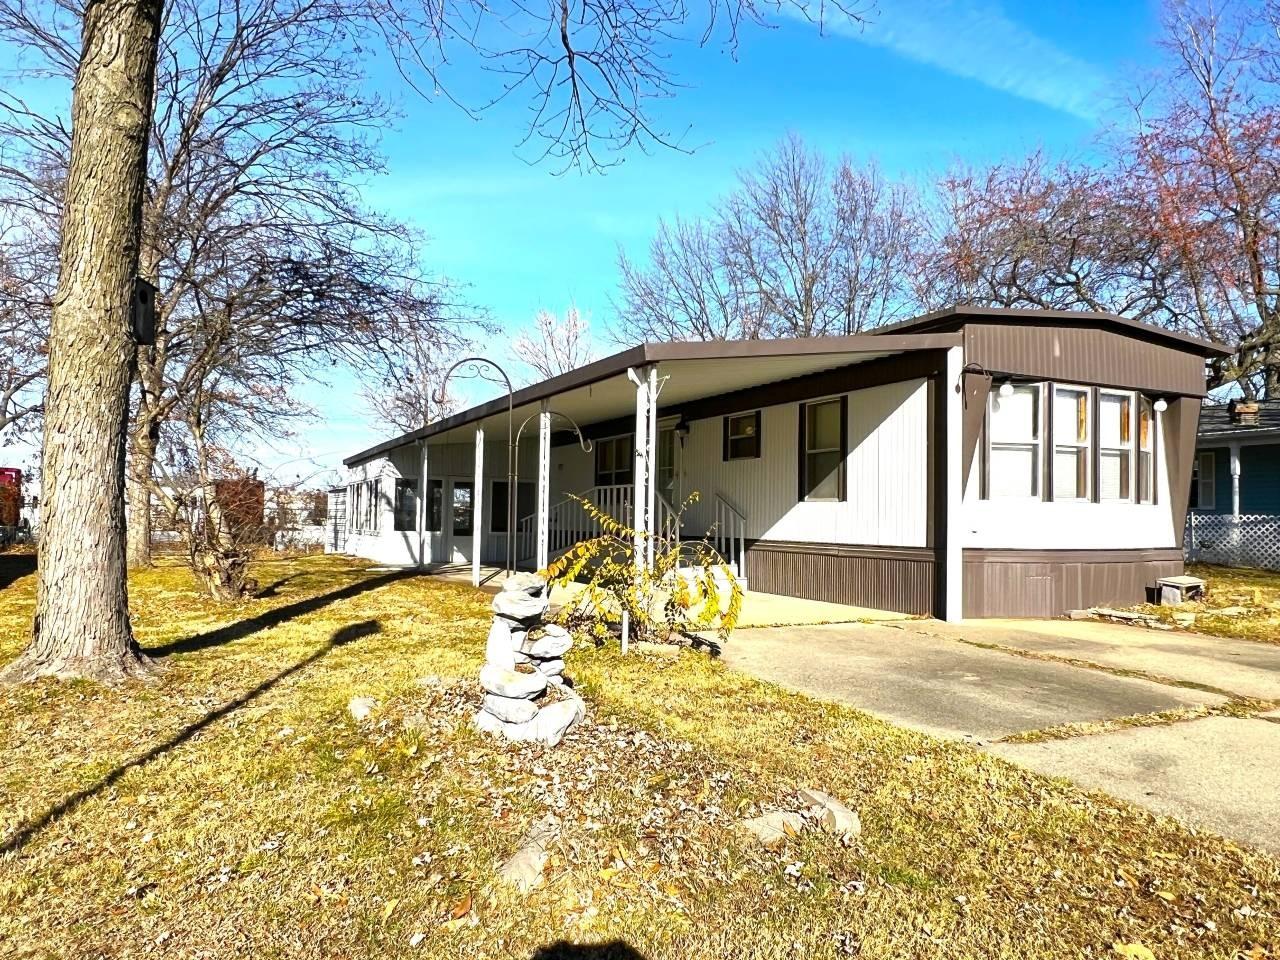 Property Image for 202 W. Glenwood St. Leased land mobile home only being sold.